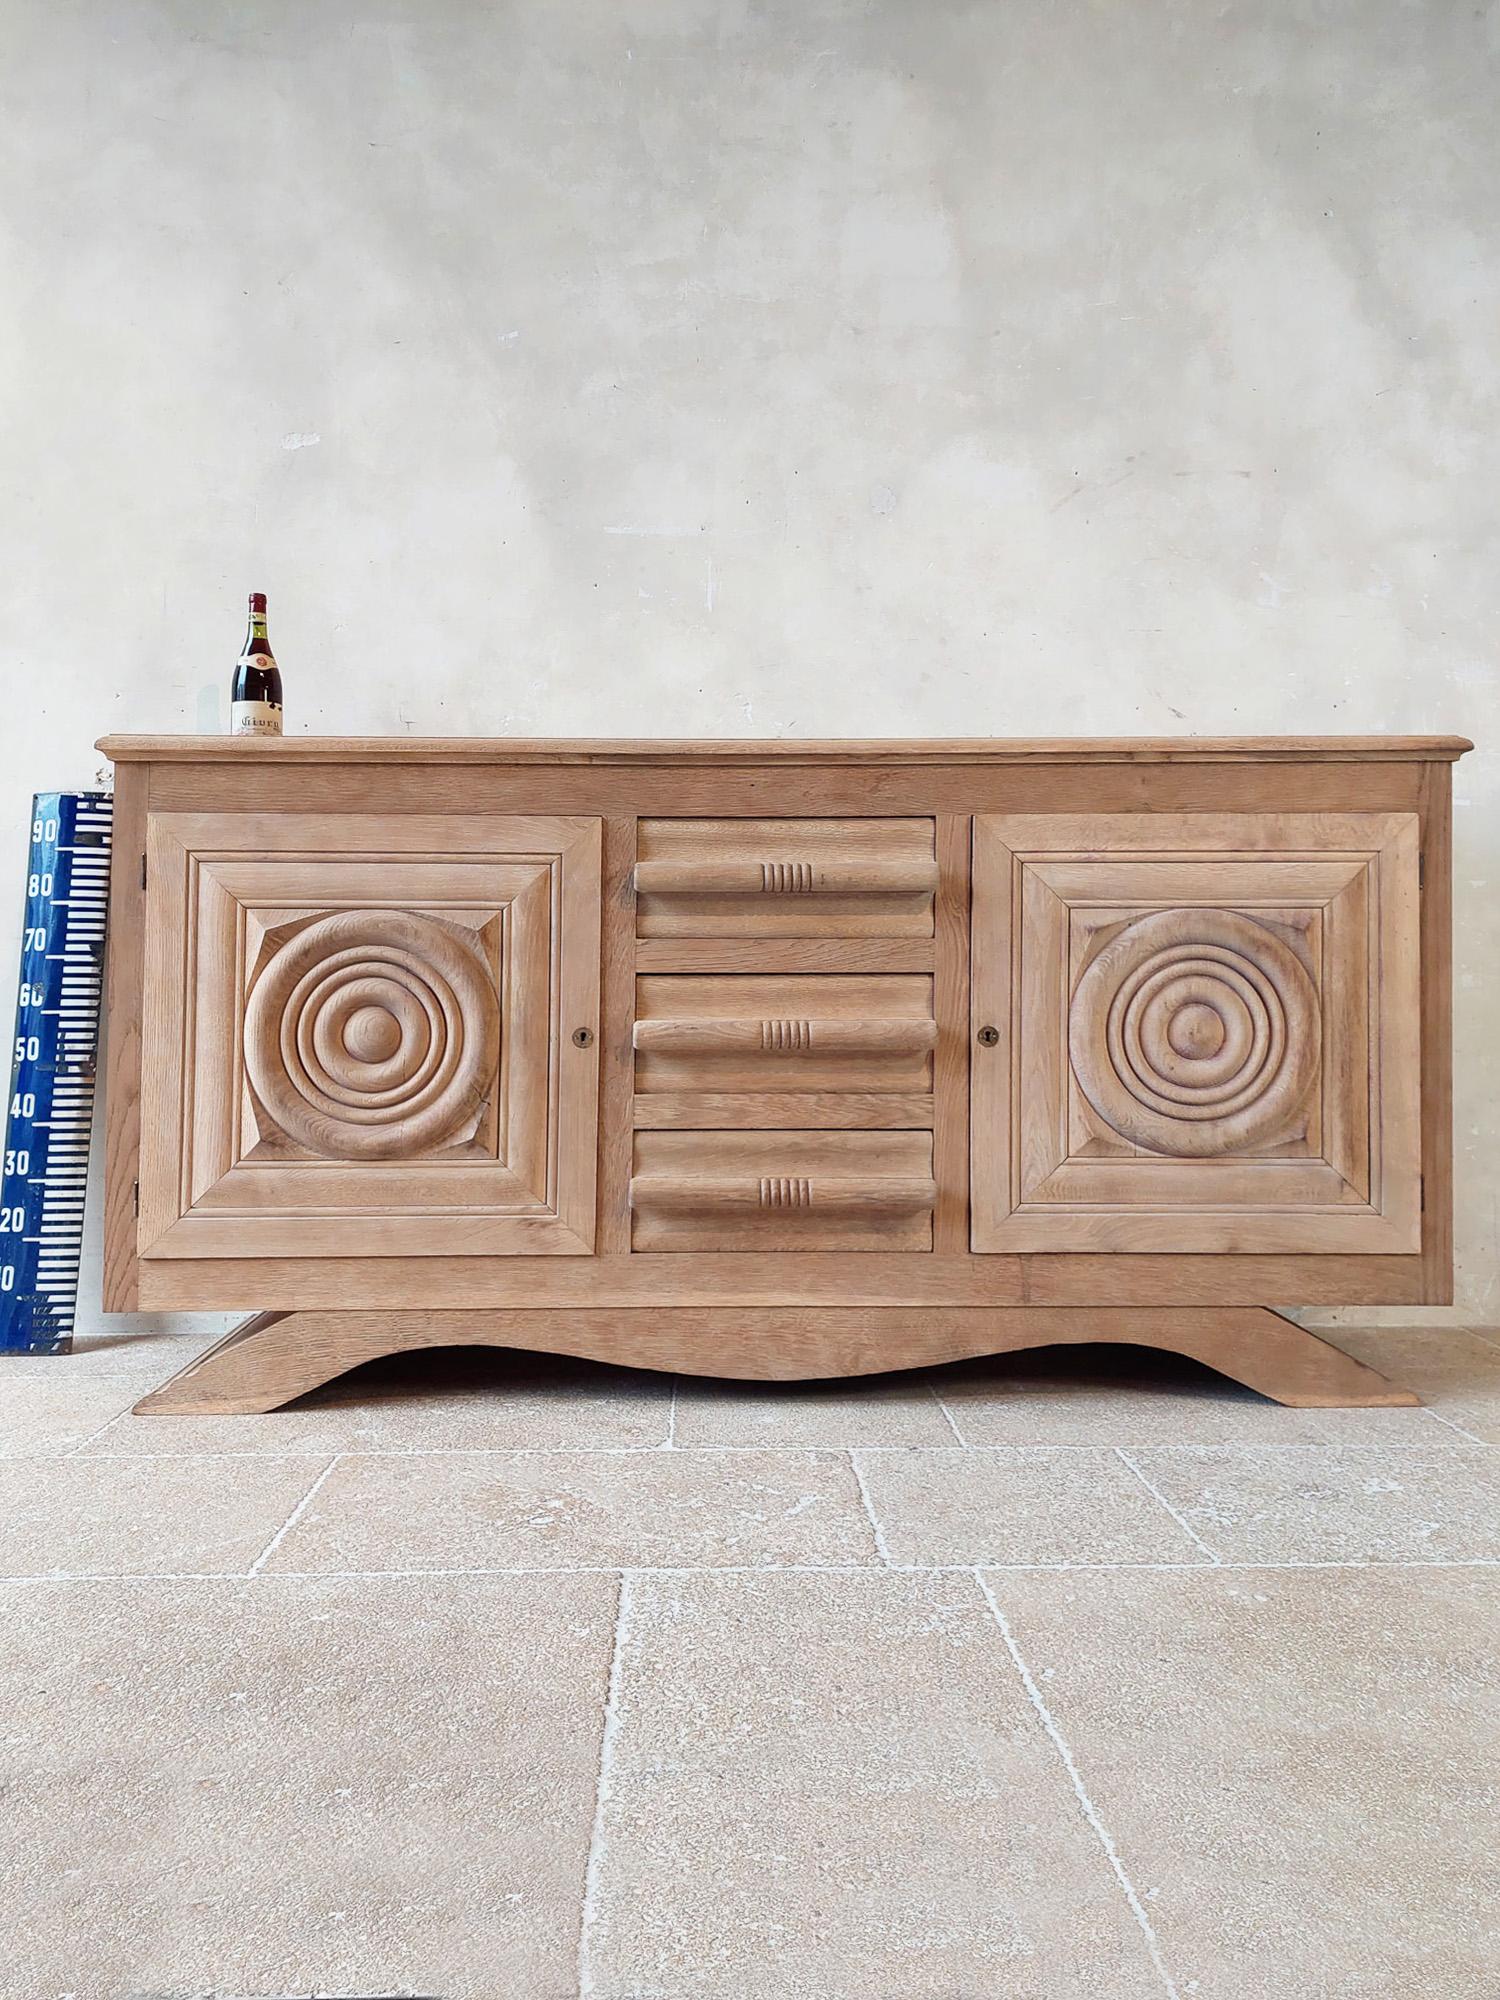 Leached oak sideboard by Charles Dudouyt from the 1940s, with two round paneled doors and 3 drawers with wooden handles that are incorporated within the design.

Measures: H 103 x W 204 x D 54 cm.